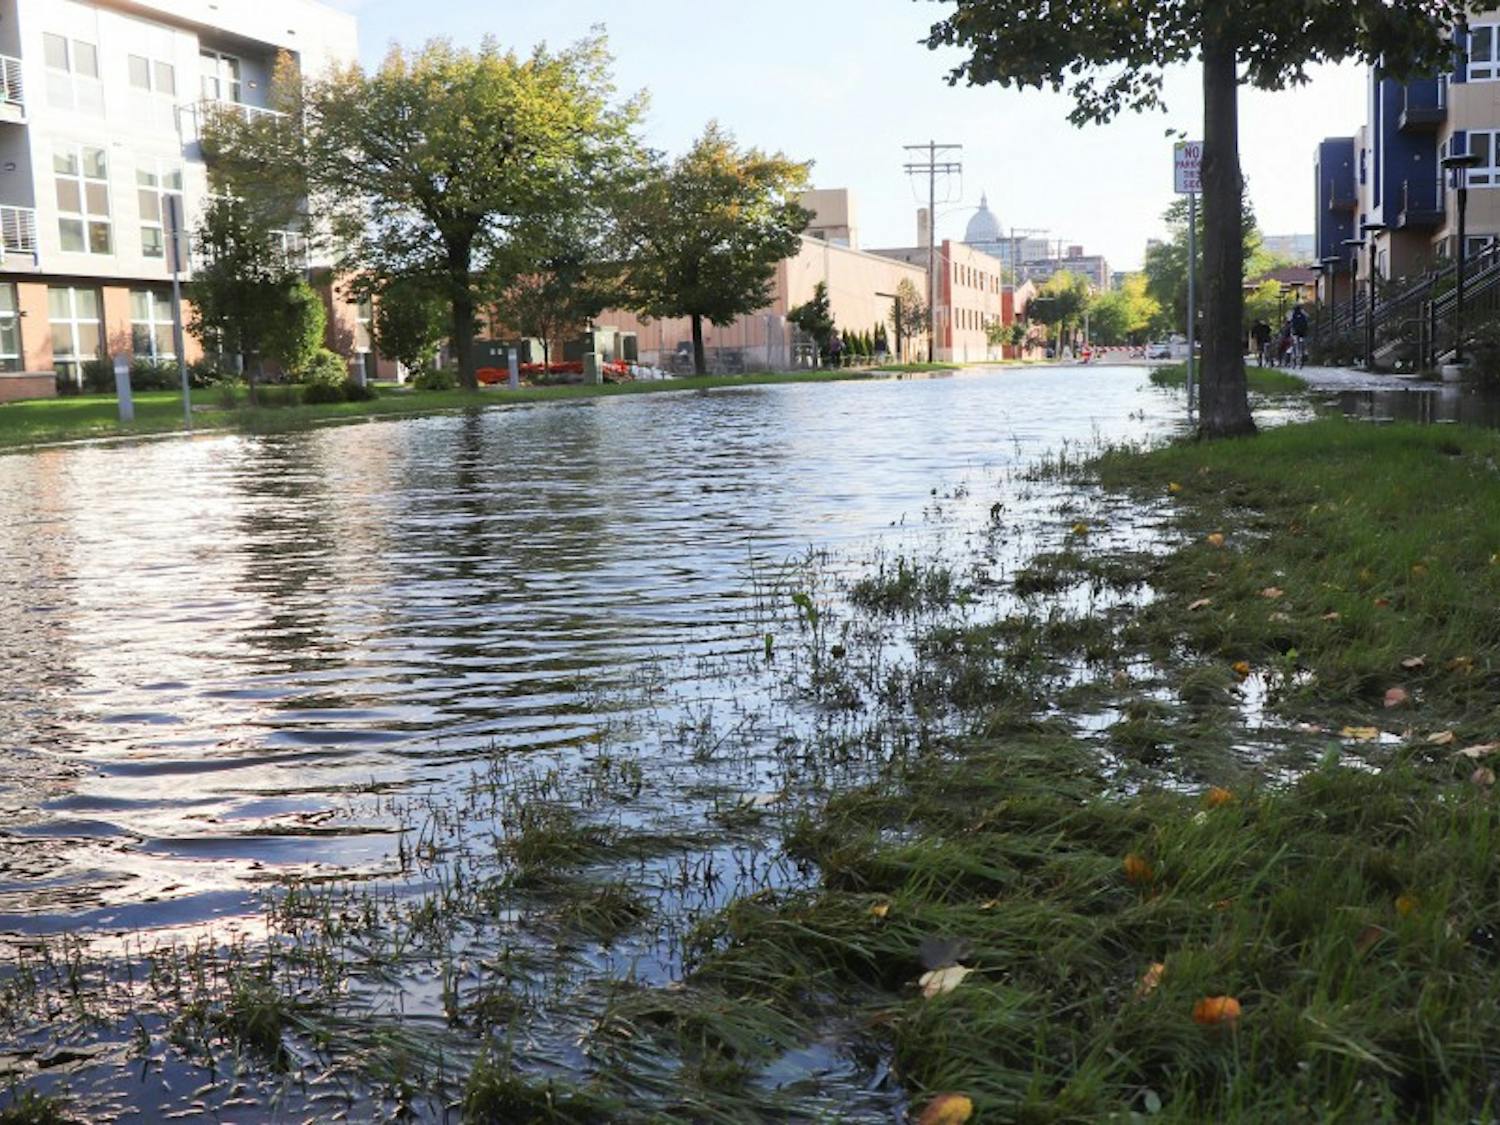 Madison city officials and the National Weather Service warned of flash flooding as forecasts predict several days of rain.